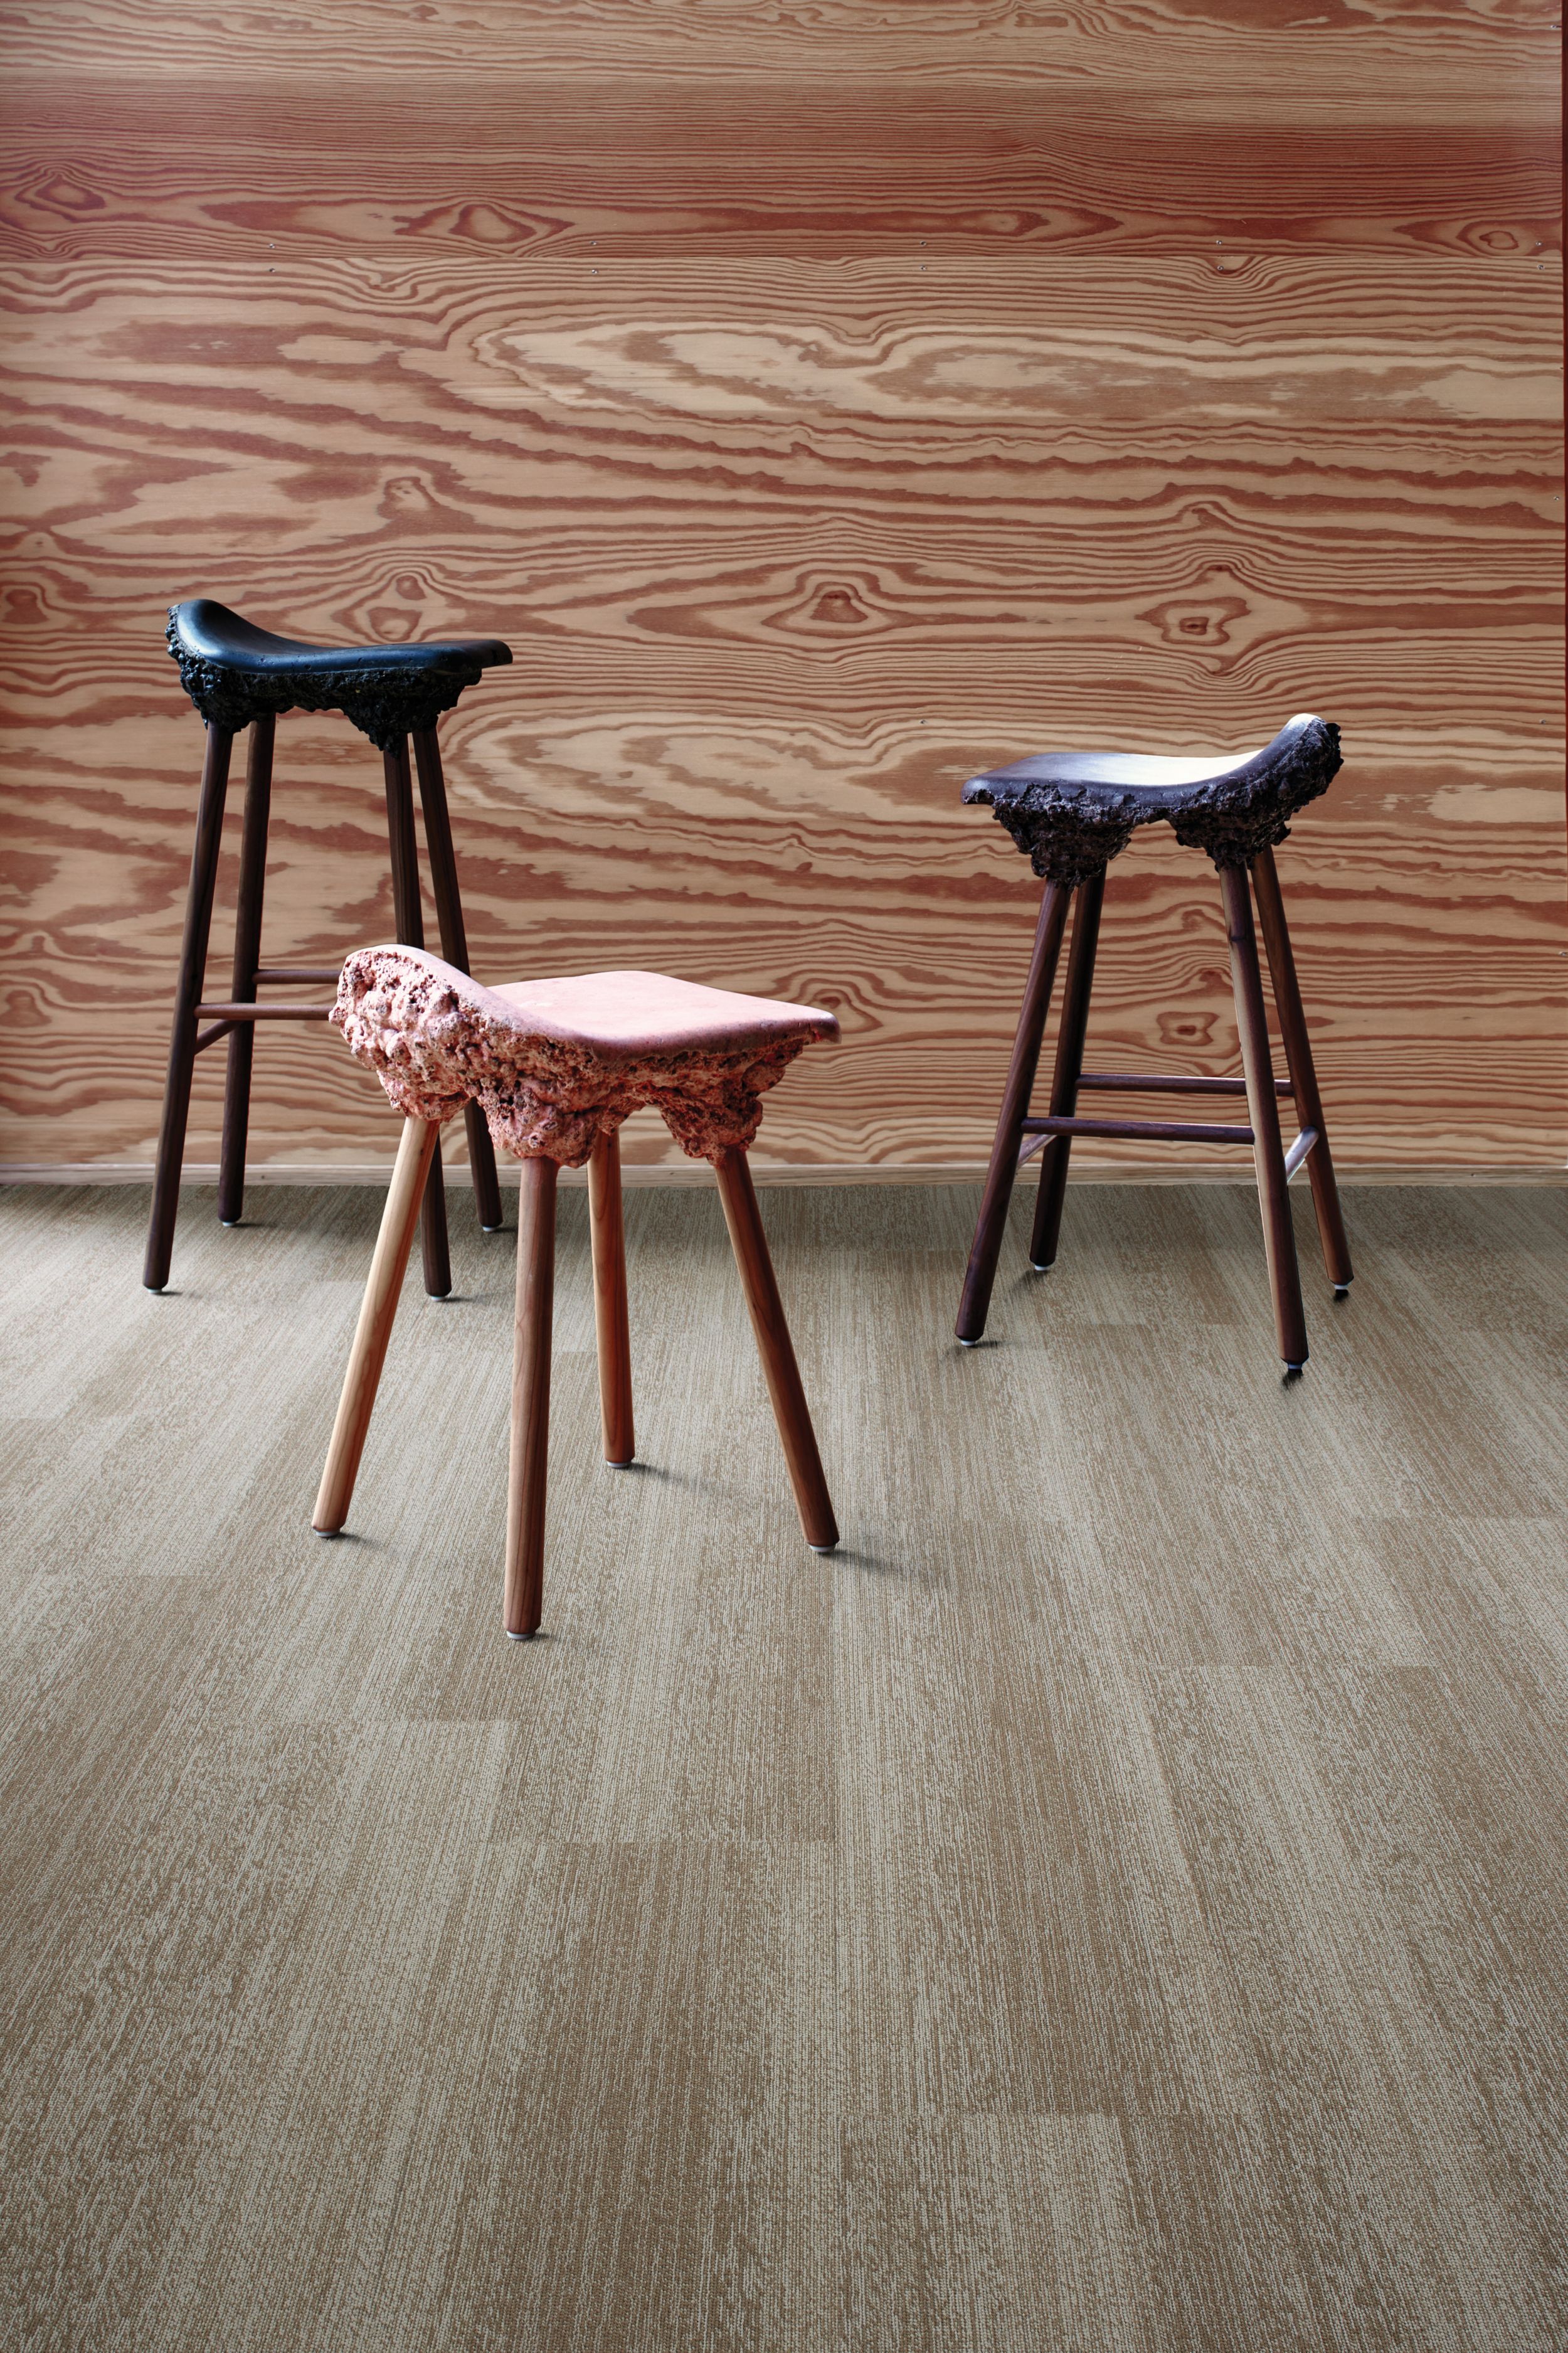 Interface Touch of Timber plank carpet tile in room with plywood wall and three unusual stools número de imagen 1